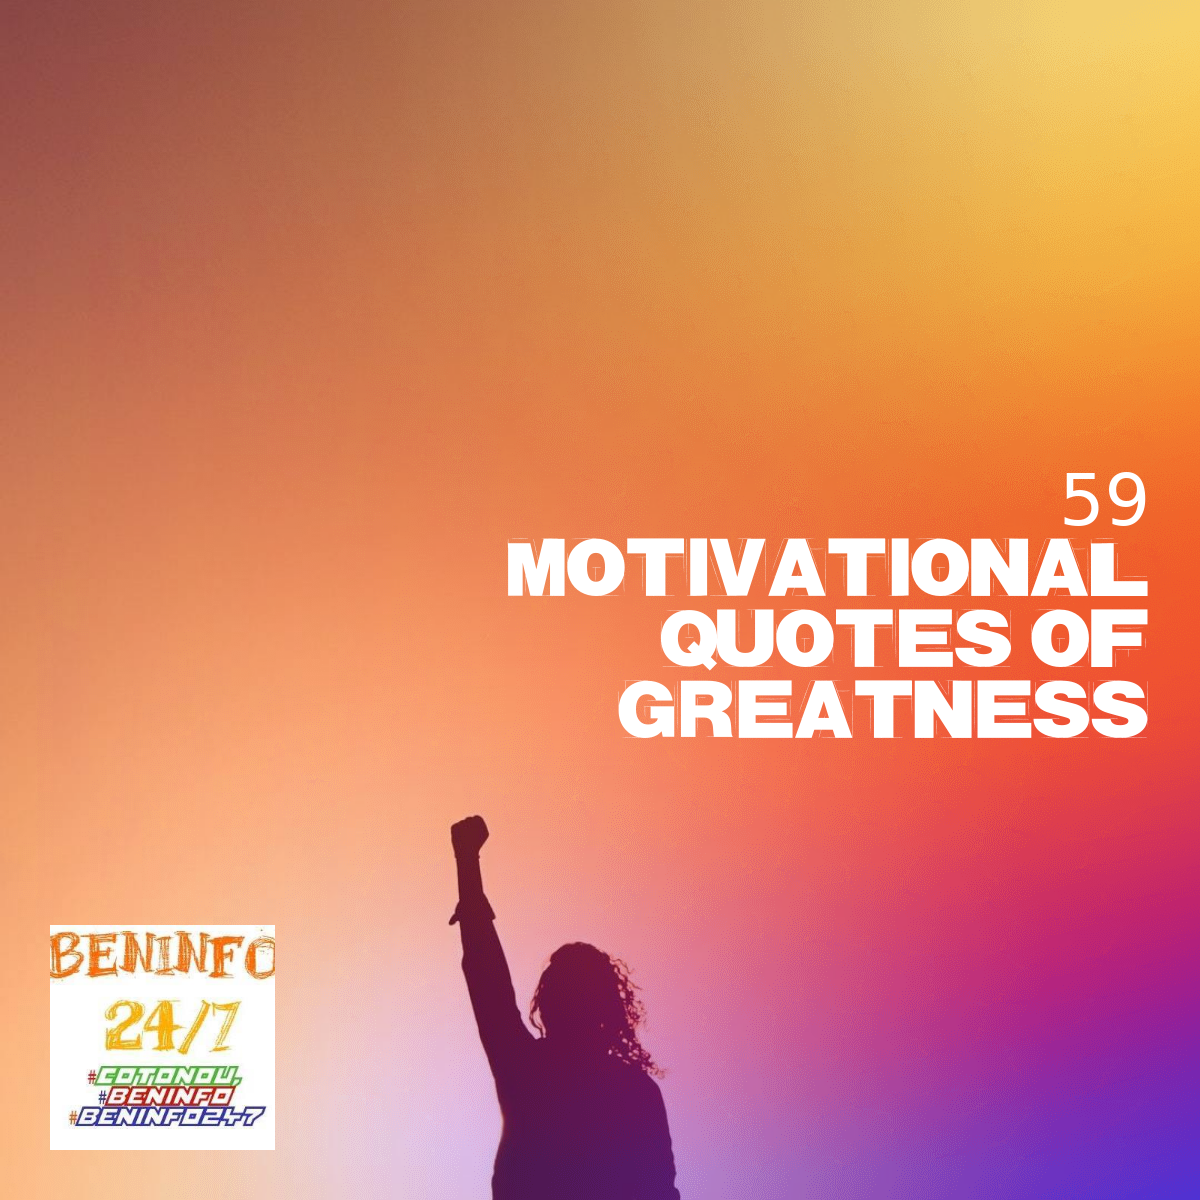 59 Motivational Quotes of Greatness